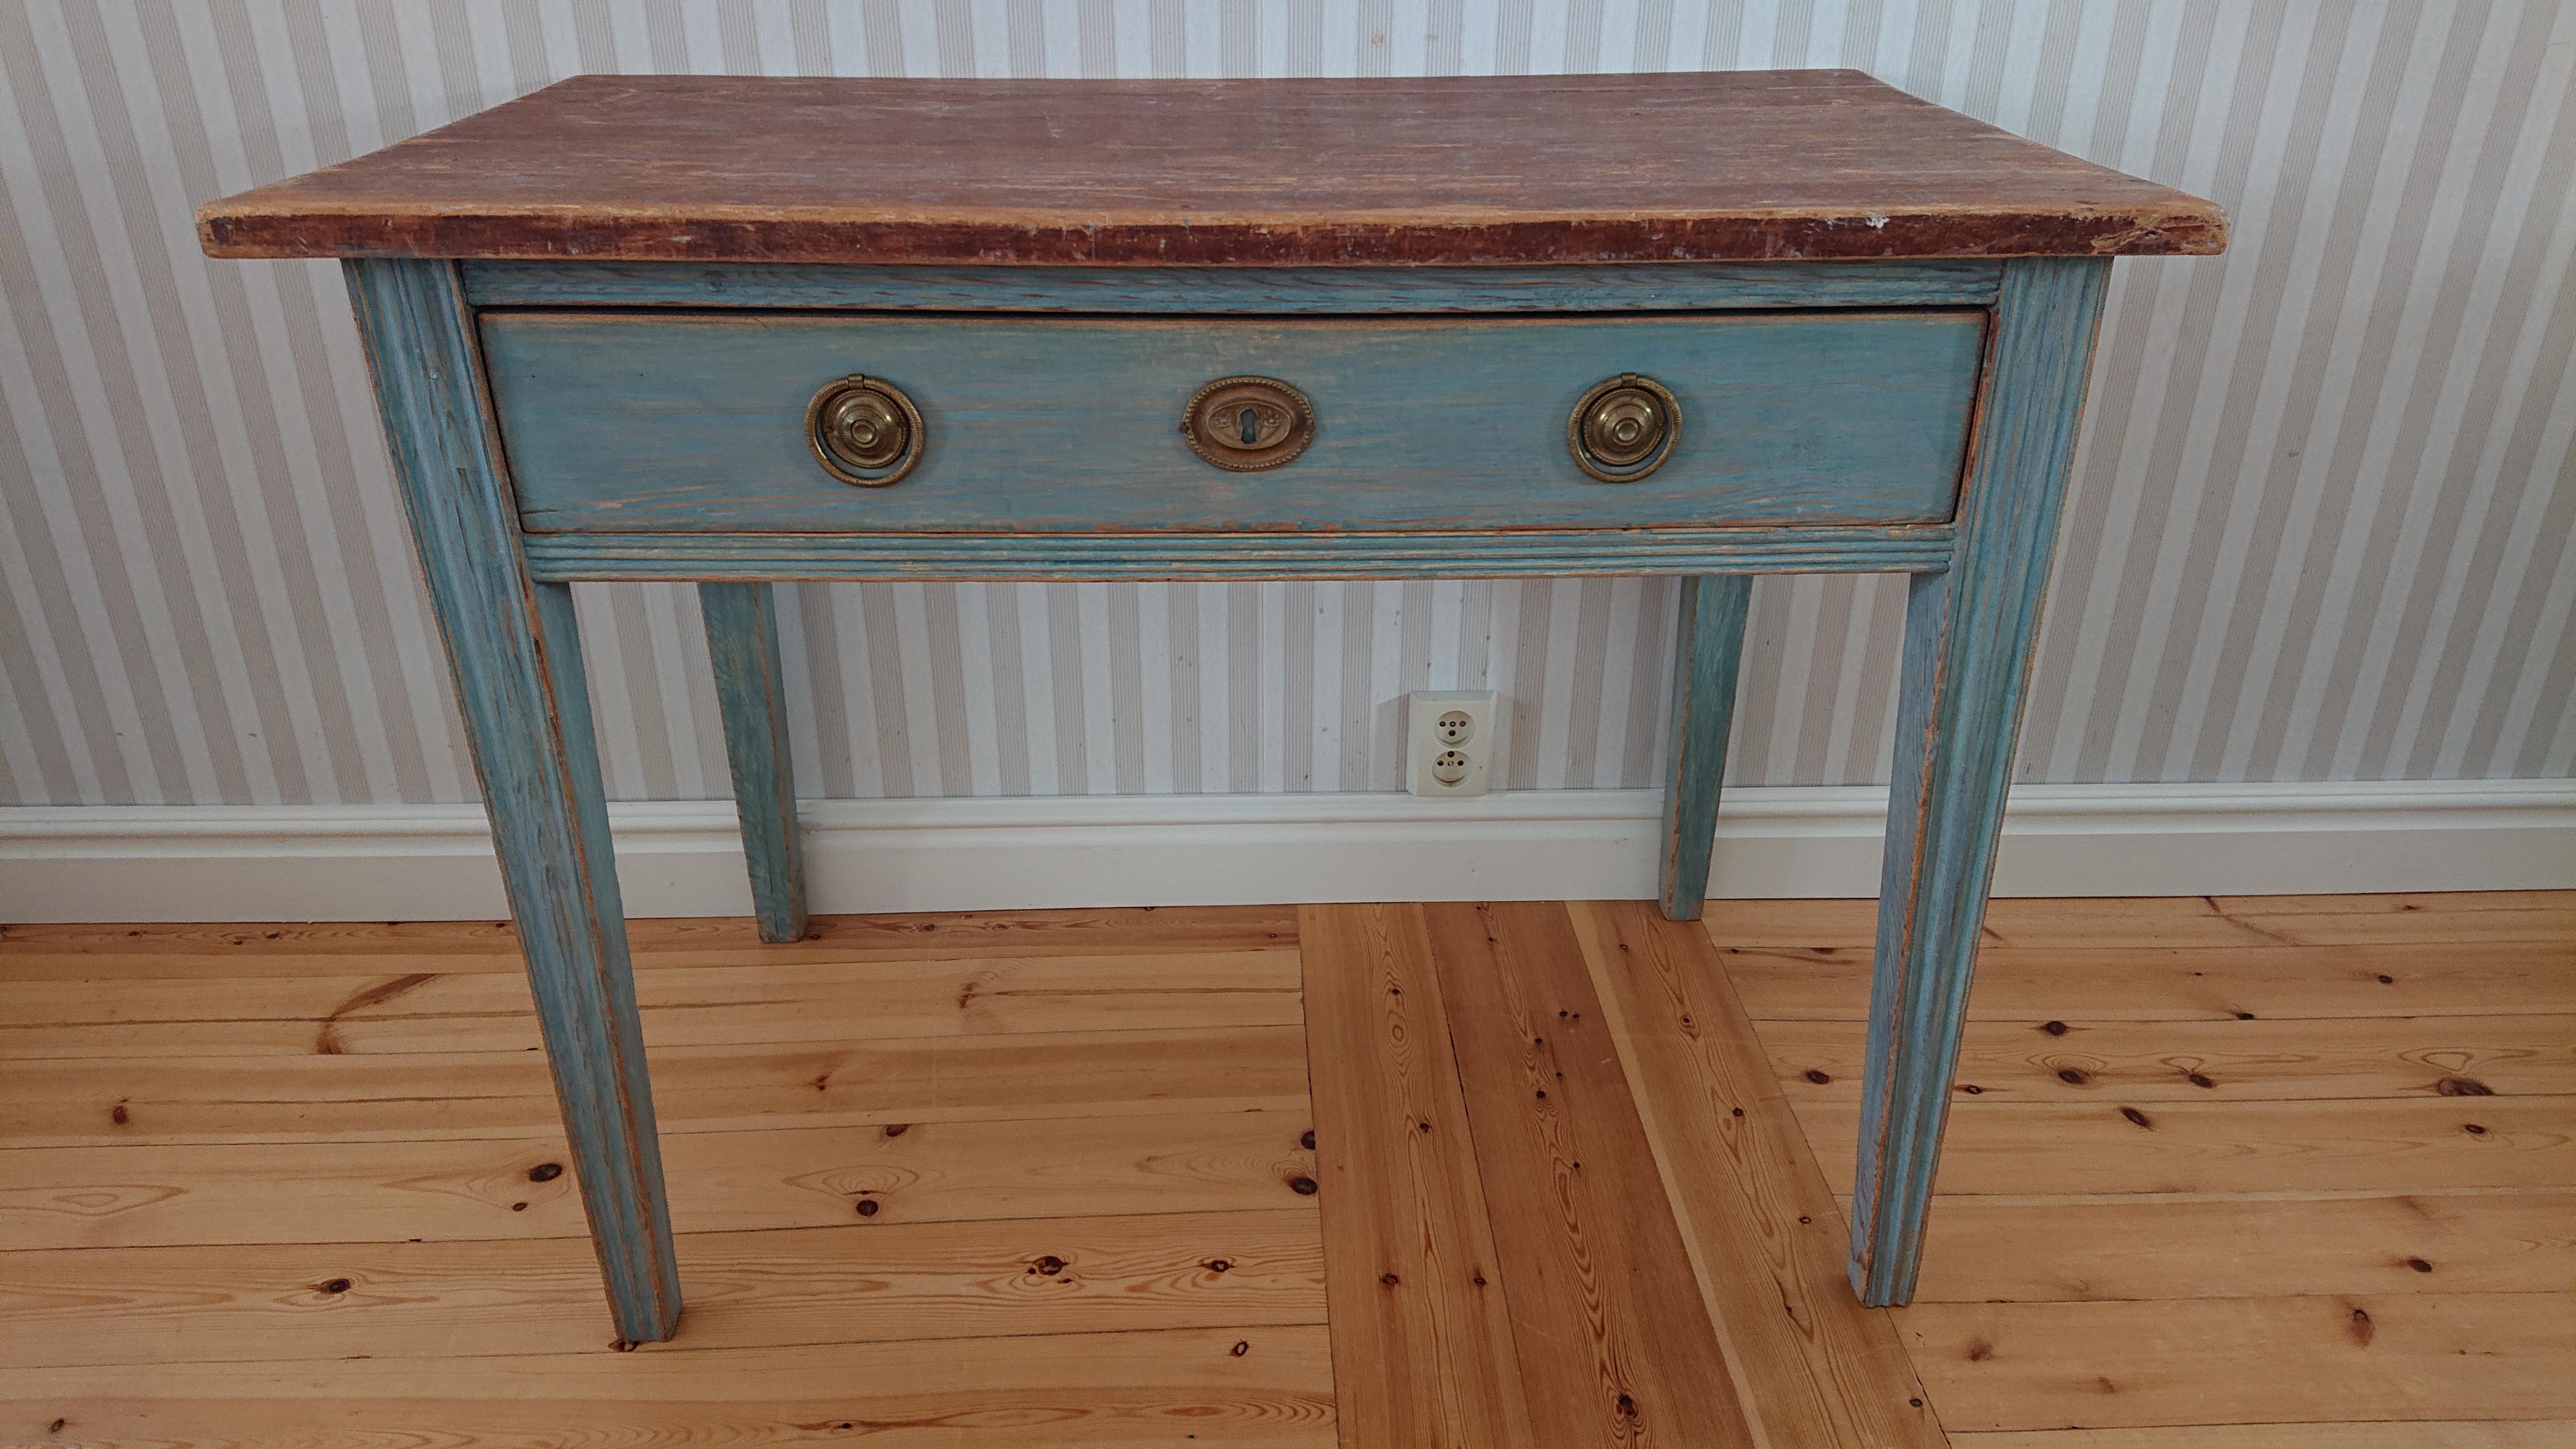 Early 19th century Swedish Gustavian  antique rustic desk from Umeå Västerbotten, Northern Sweden.
Nice Gustavian Desk Scraped by hand to its original paint.
The table has lovely blue color & stunning patina.
The table has reeded legs and reeded at